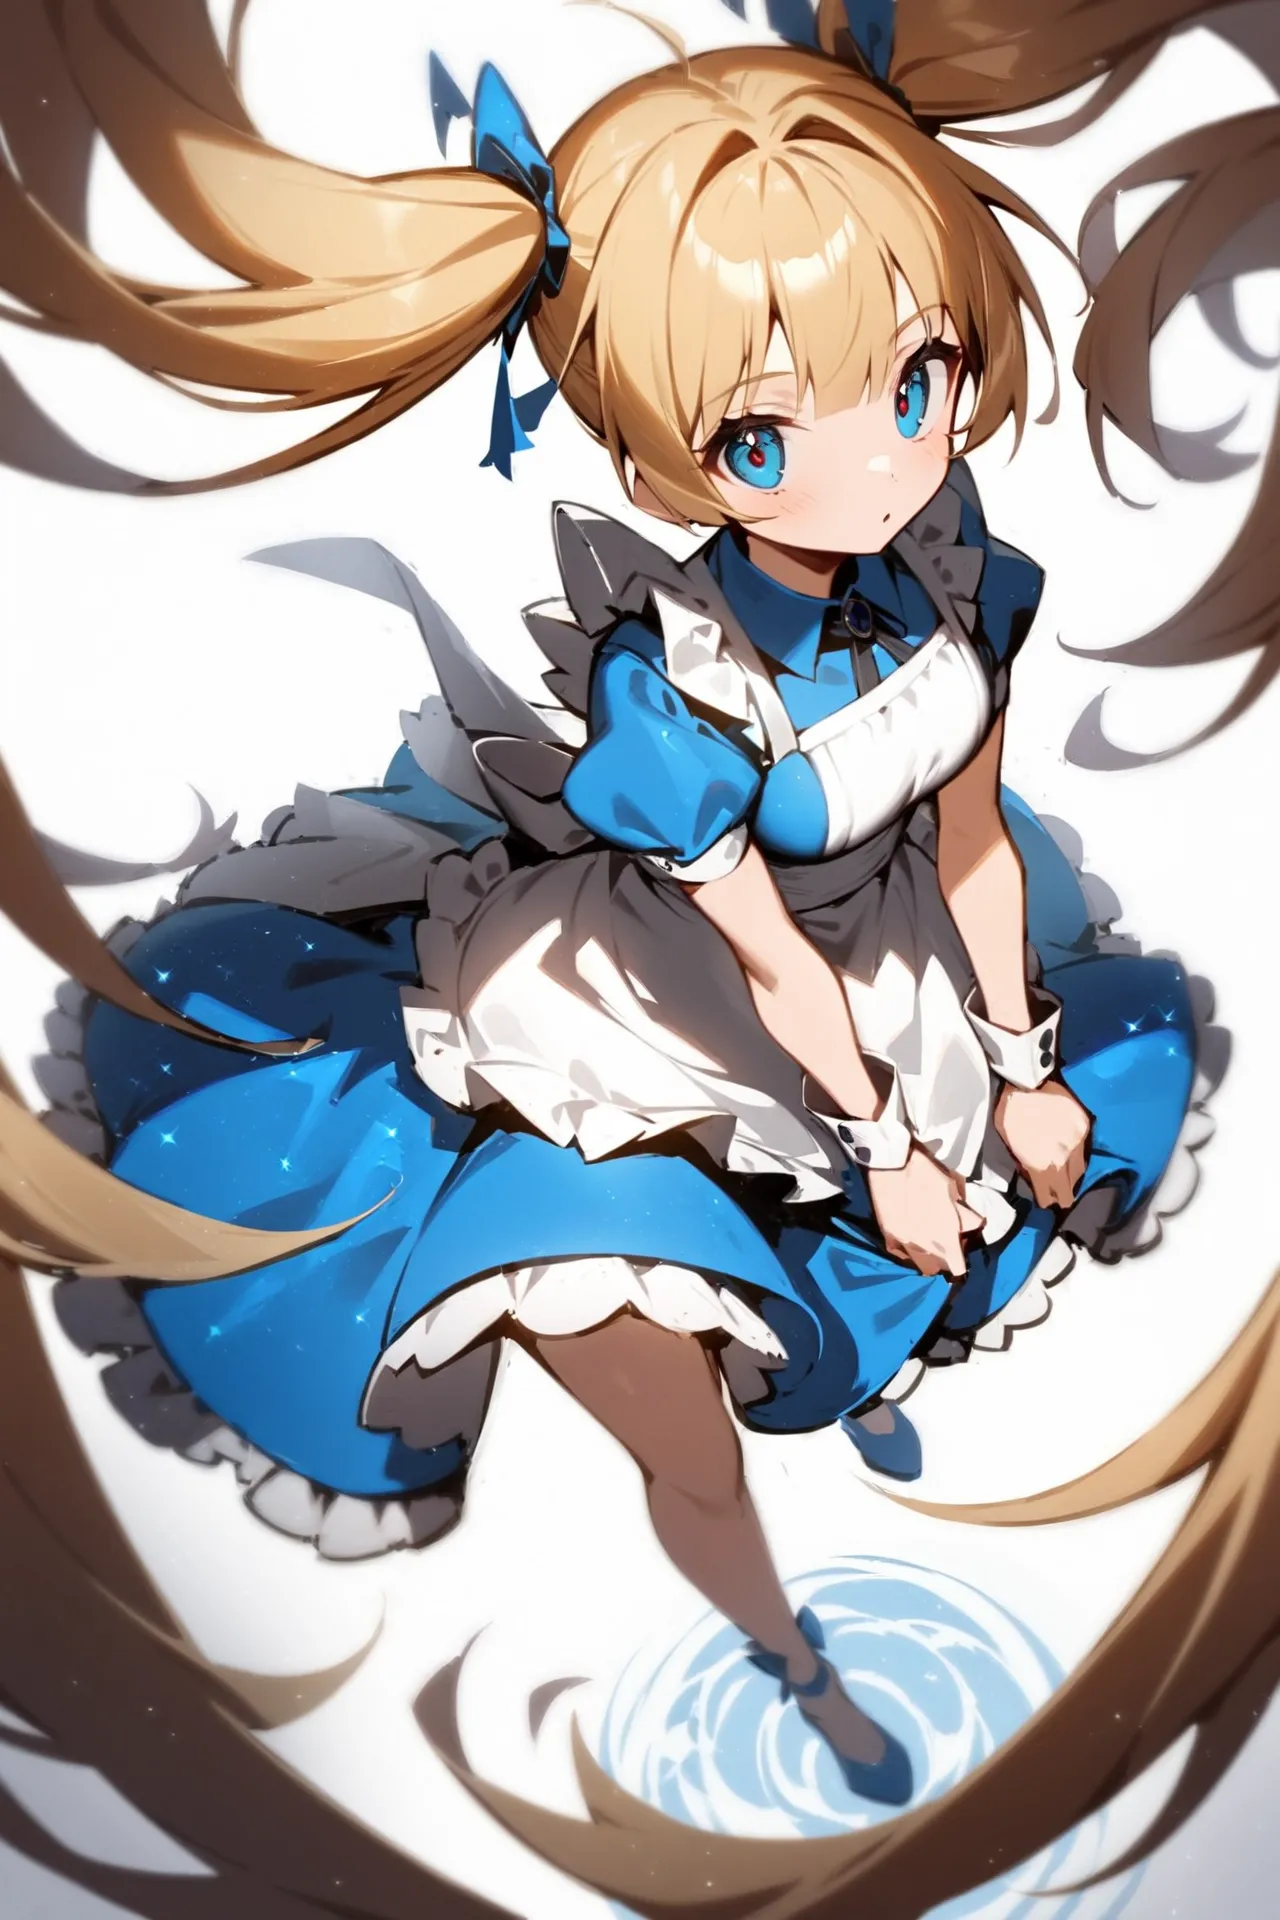 '1girl, from above,\nblonde hair, twintails, blue dress, white apron,\nwhite background,\nAlice in glitterworld\nNegative prompt: (worst quality, low quality:1.4), nsfw\nSteps: 35, Sampler: DPM++ 2M SDE Karras, CFG scale: 7, Seed: 1, Size: 640x960, Model hash: 642b08ca49, Model: ConfusionXL2.0_fp16_vae, VAE hash: 63aeecb90f, VAE: sdxl_vae_0.9.safetensors, Denoising strength: 0.6, Clip skip: 2, Hires upscale: 2, Hires steps: 15, Hires upscaler: ESRGAN_4x, Eta: 0.68, Version: v1.7.0'